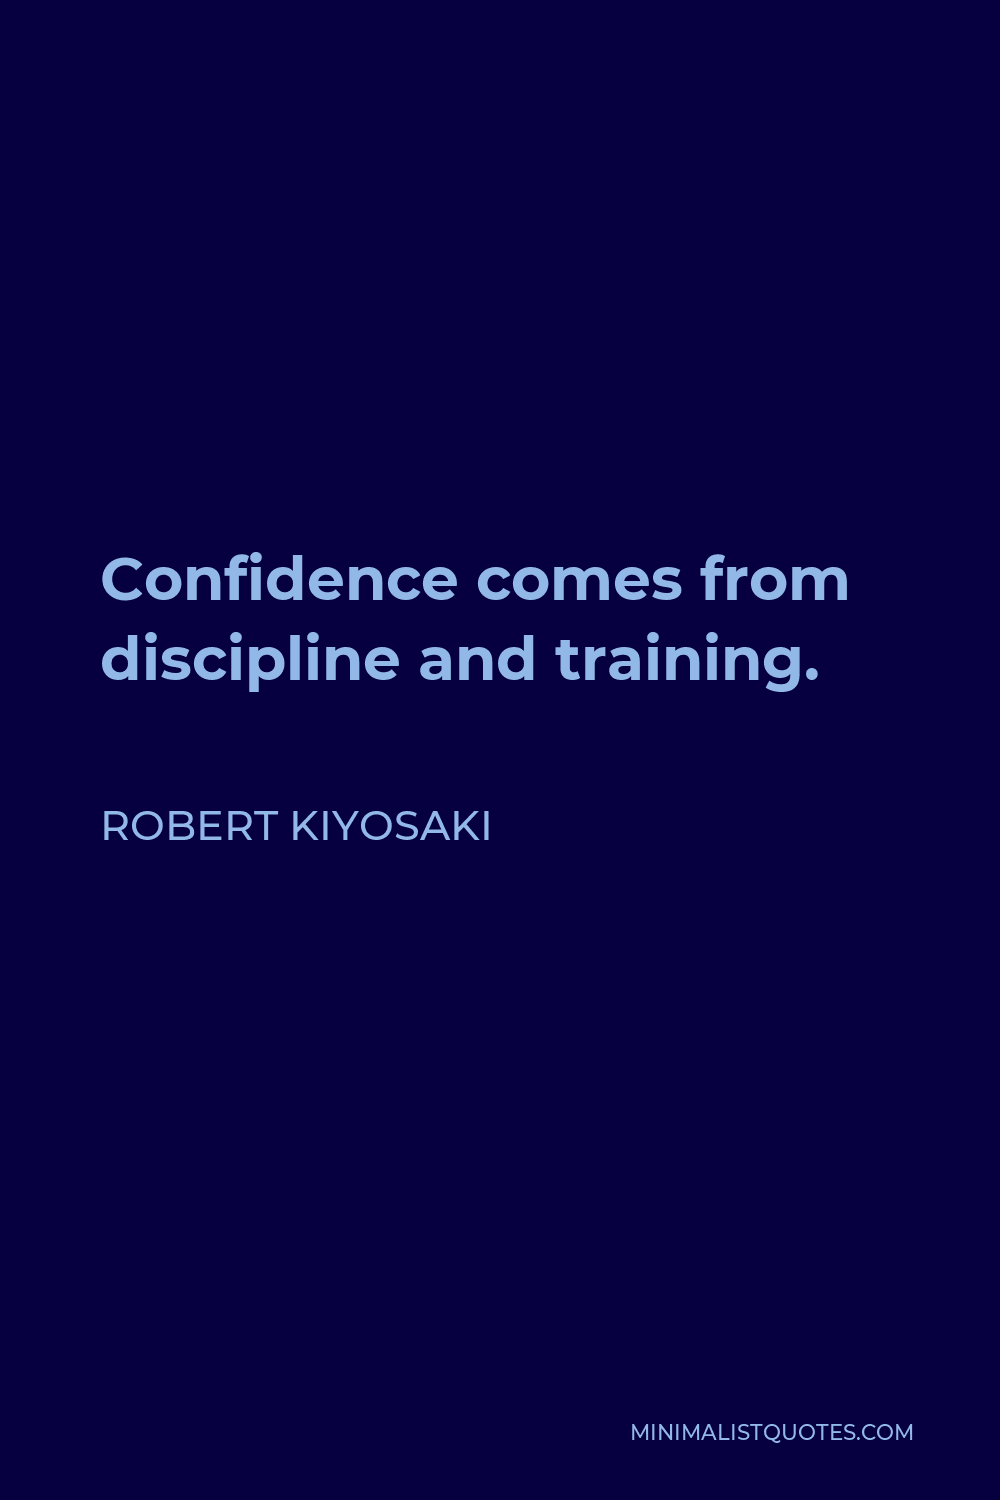 Robert Kiyosaki Quote - Confidence comes from discipline and training.